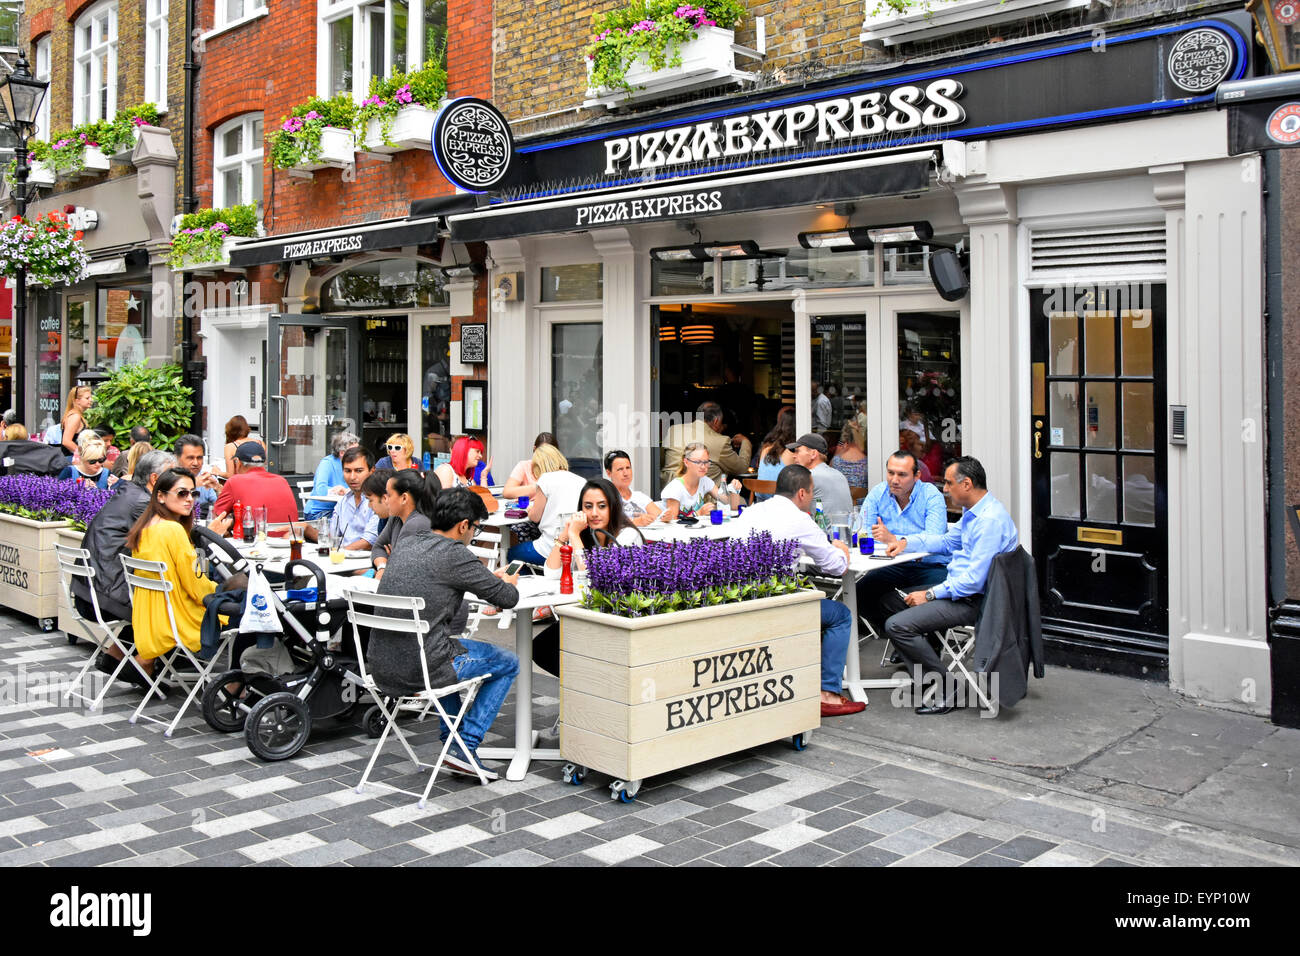 Pizza Express pizza restaurant with people eating out dining outdoors in St Christophers Place off Oxford Street alfresco dining London West End UK Stock Photo